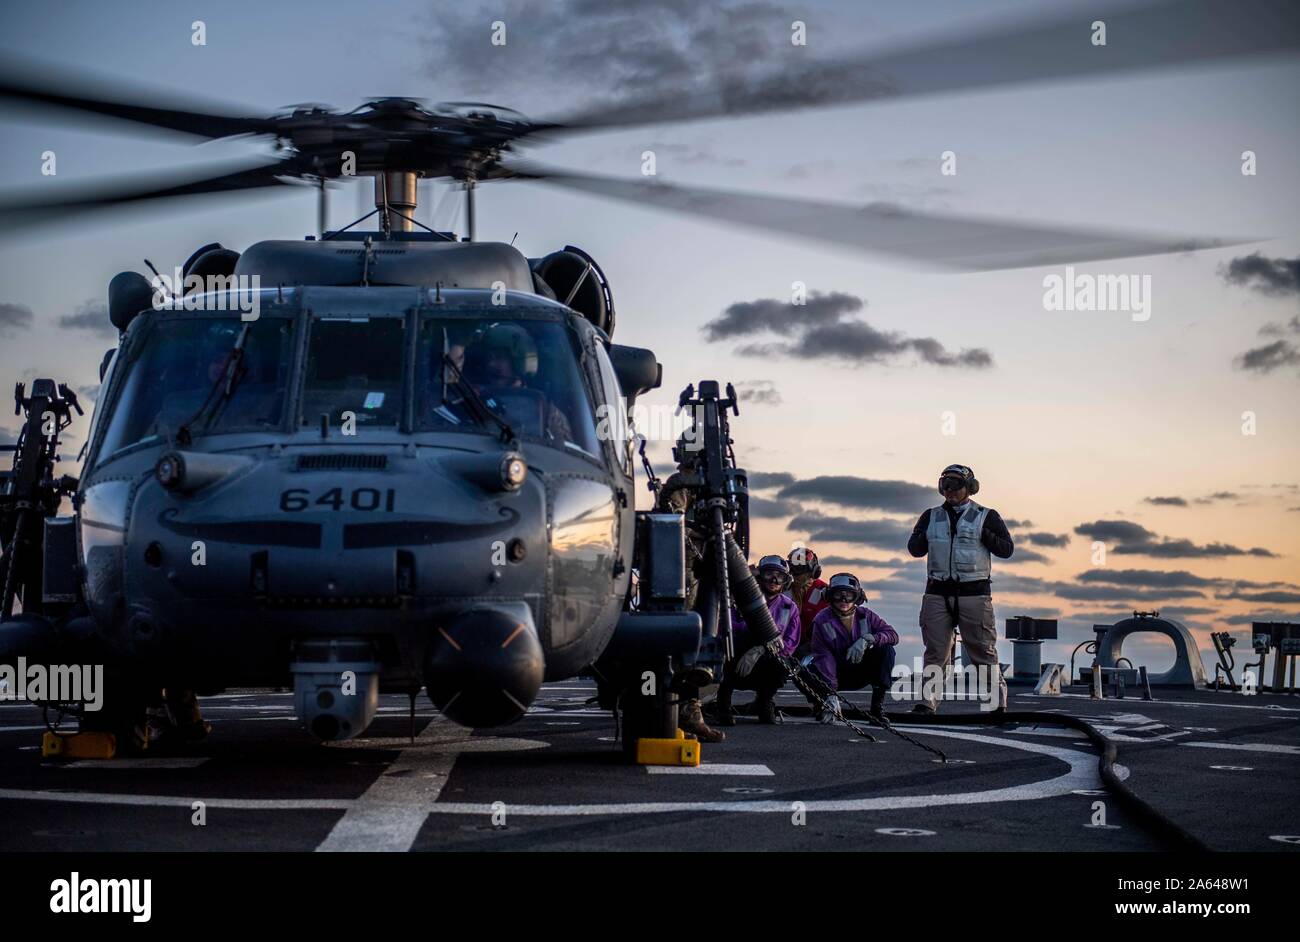 SEA OF JAPAN (Oct. 16, 2019) Sailors refuel an HH-60 Pave Hawk helicopter, assigned to the U.S. Air Force’s 33rd Rescue Squadron, on the flight deck of the Arleigh Burke-class guided-missile destroyer USS Milius (DDG 69) during joint deck landing qualifications. Milius is underway conducting operations in the Indo-Pacific region while assigned to Destroyer Squadron (DESRON) 15, the Navy’s largest forward-deployed DESRON and the U.S. 7th Fleet’s principal surface force. (U.S. Navy photo by Mass Communication Specialist 2nd Class Taylor DiMartino) Stock Photo